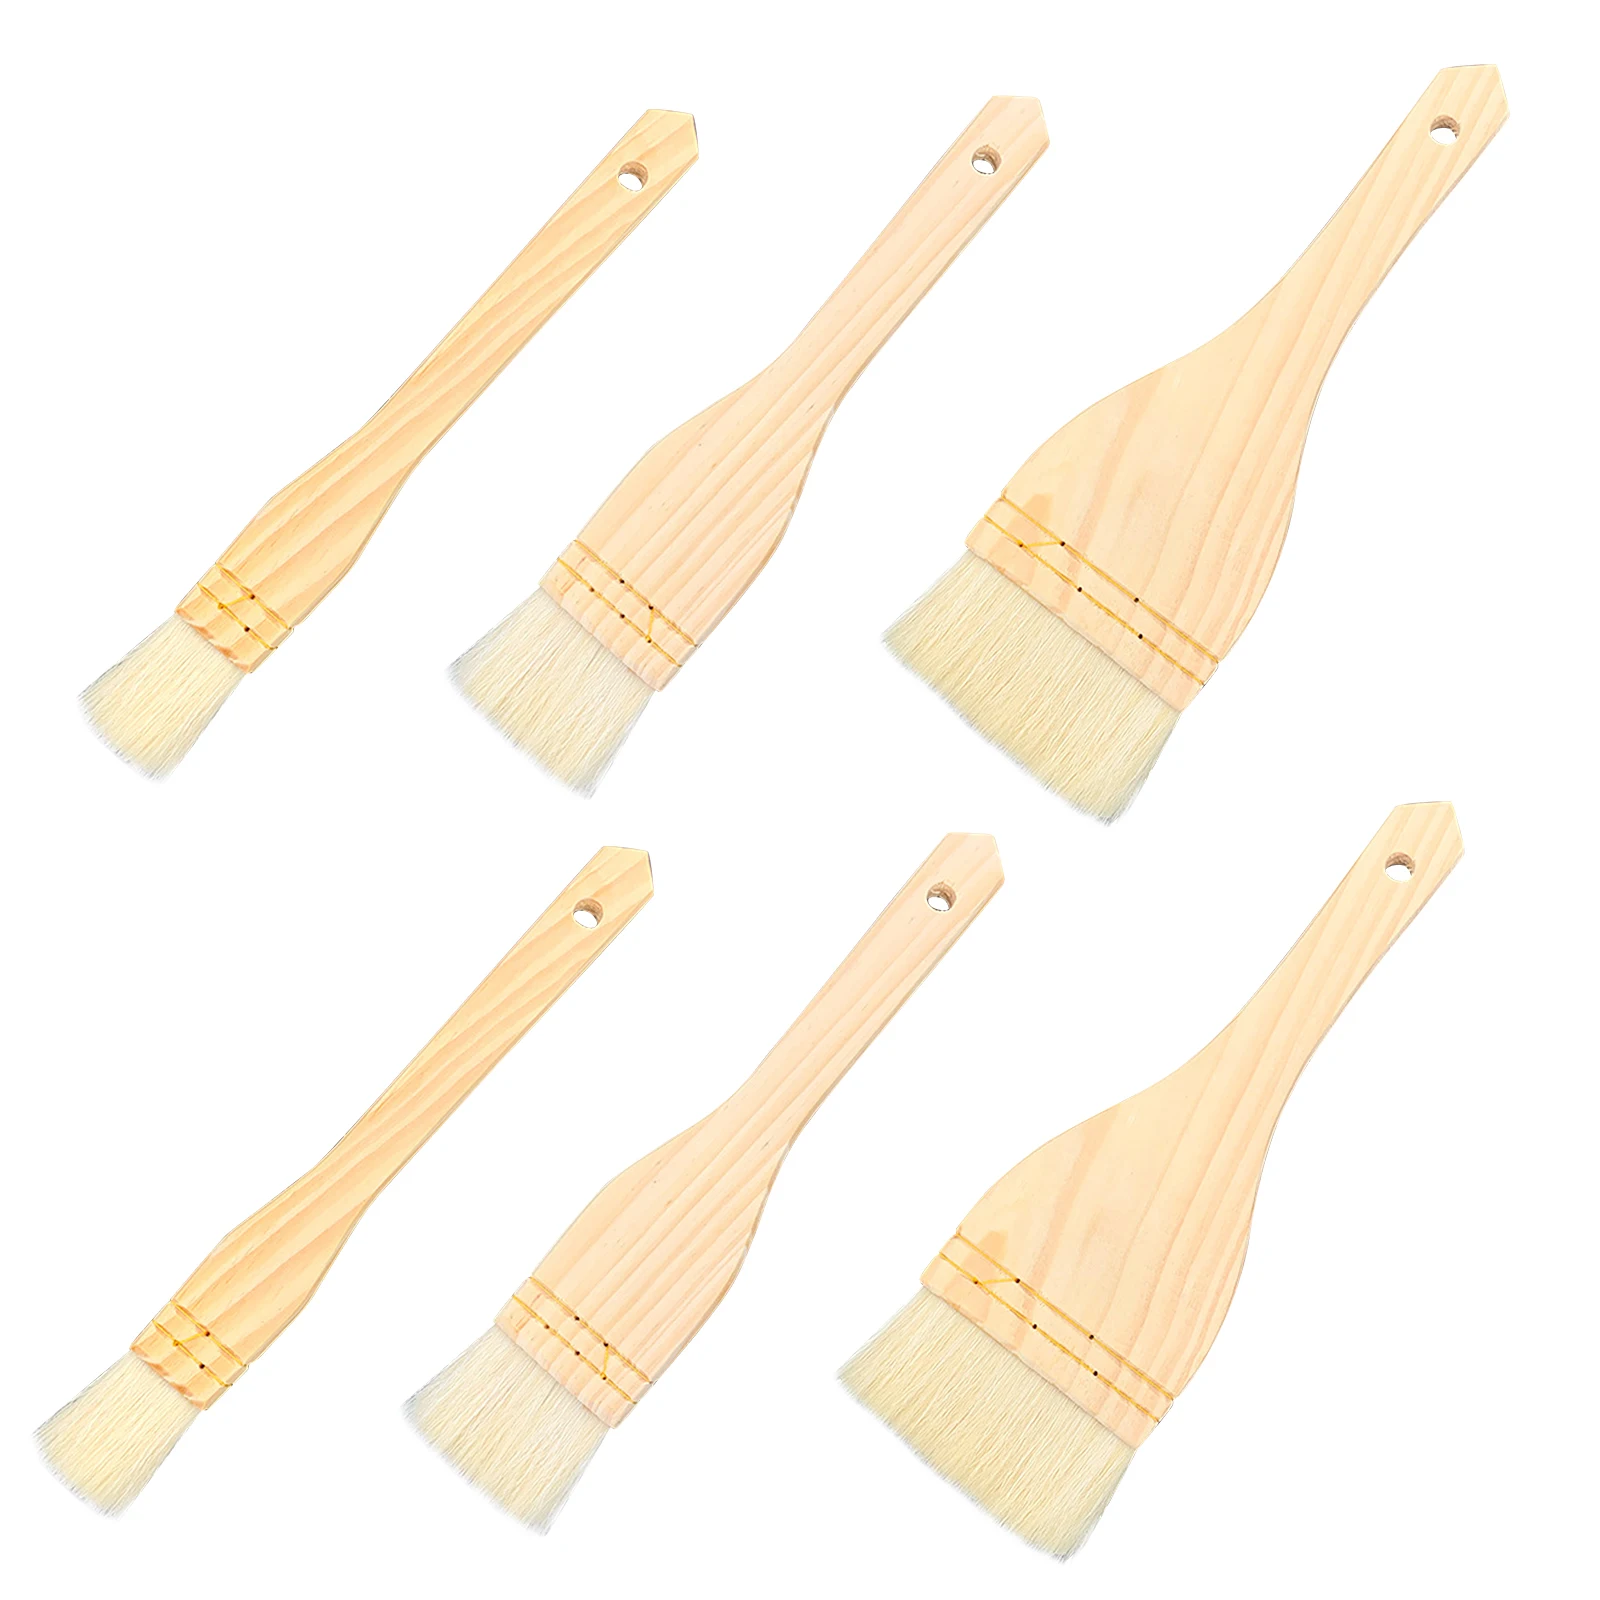 

6pcs Flat Hake Brush Soft Bristles Gift Artist Painting For Watercolor Portable Background With Handle Ceramic Pottery Modeling